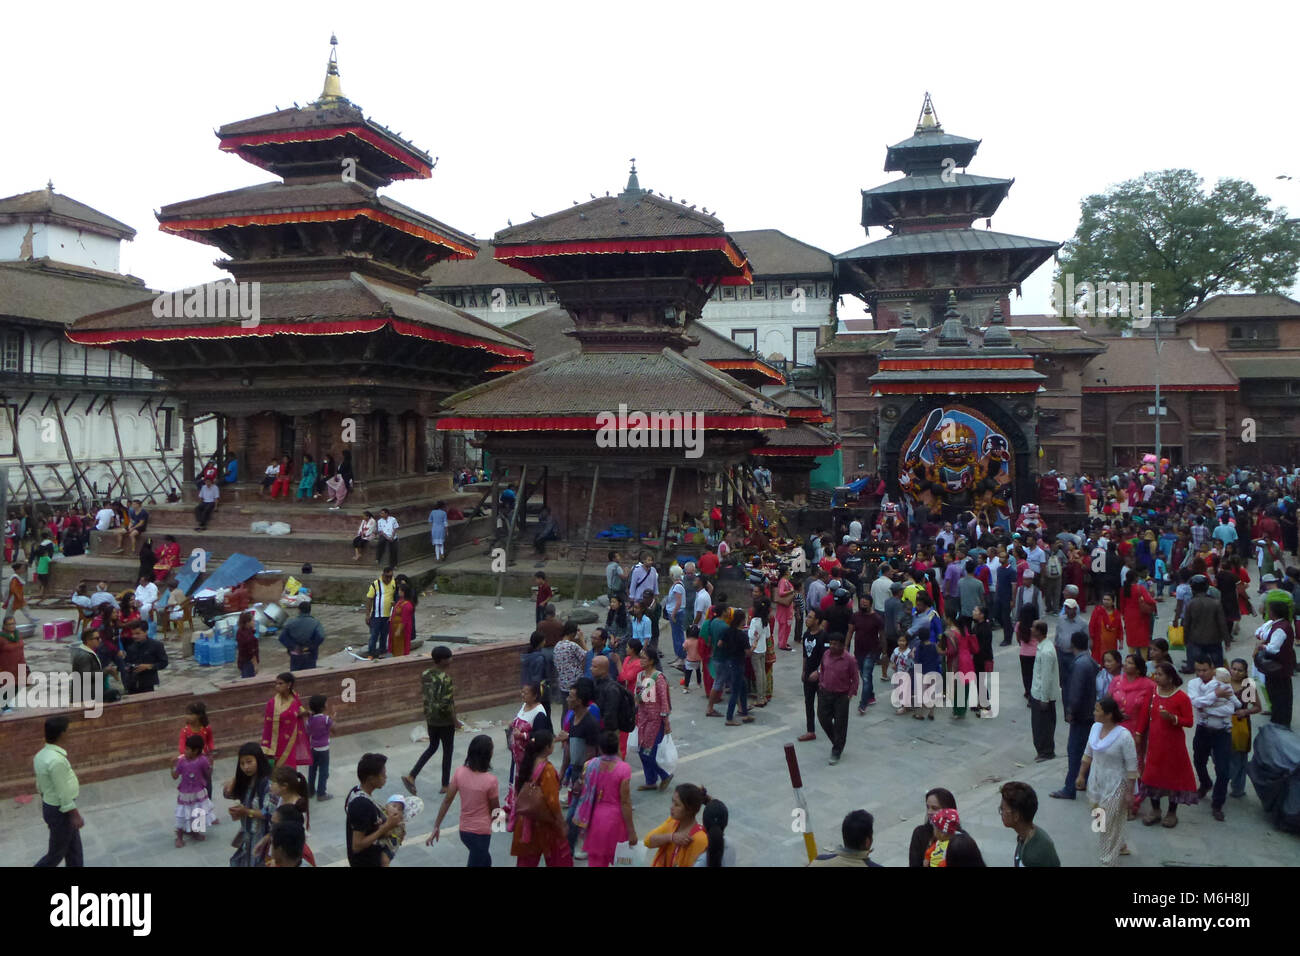 People in a crowded Durbar Square with visible damages after the earthquake, Kathmandu, Nepal Stock Photo